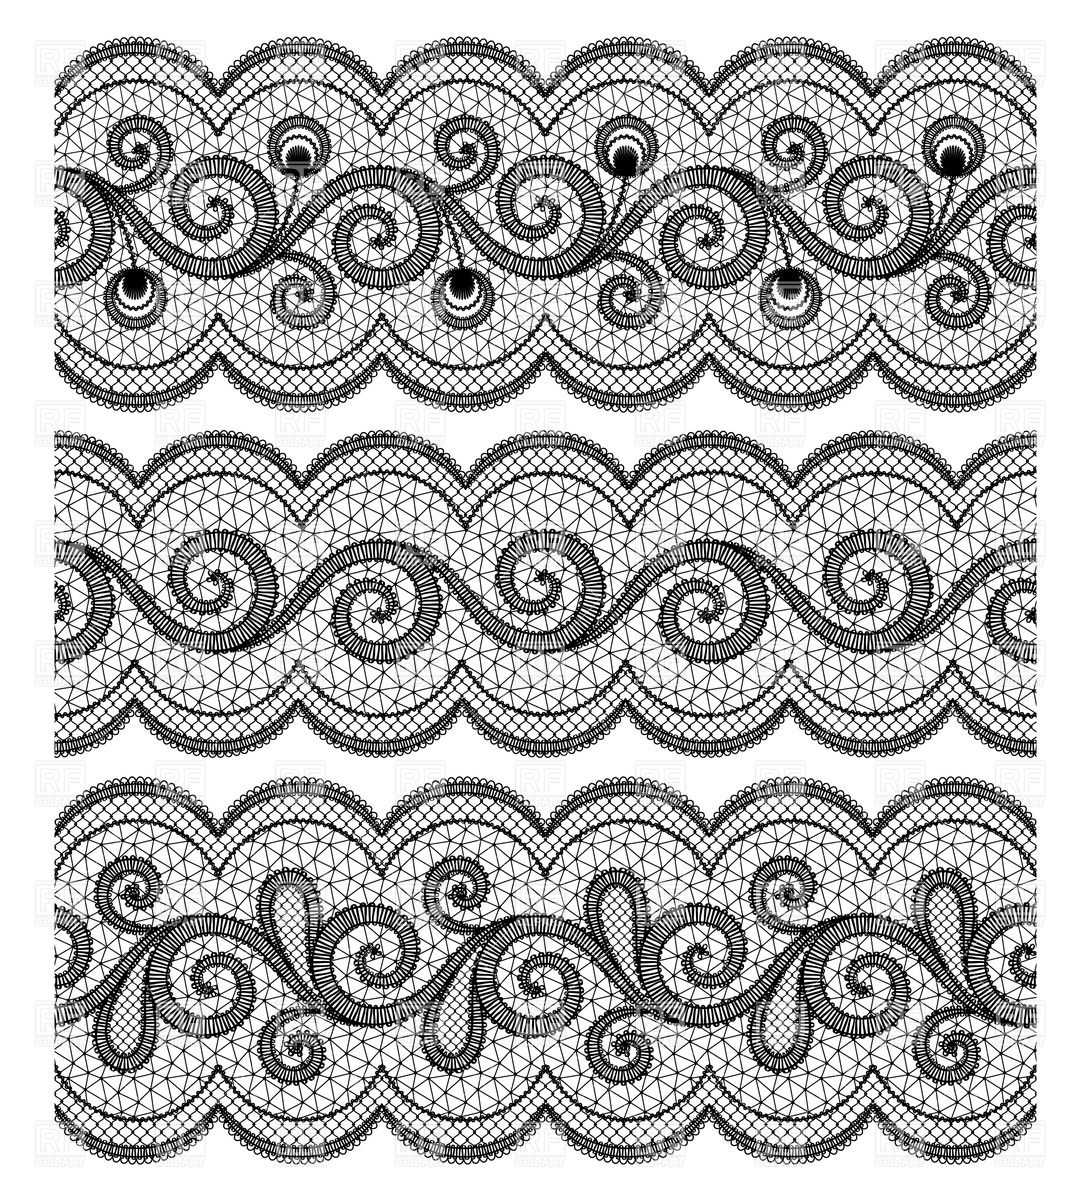 Black Lace Seamless Border Set 28773 Borders And Frames Download